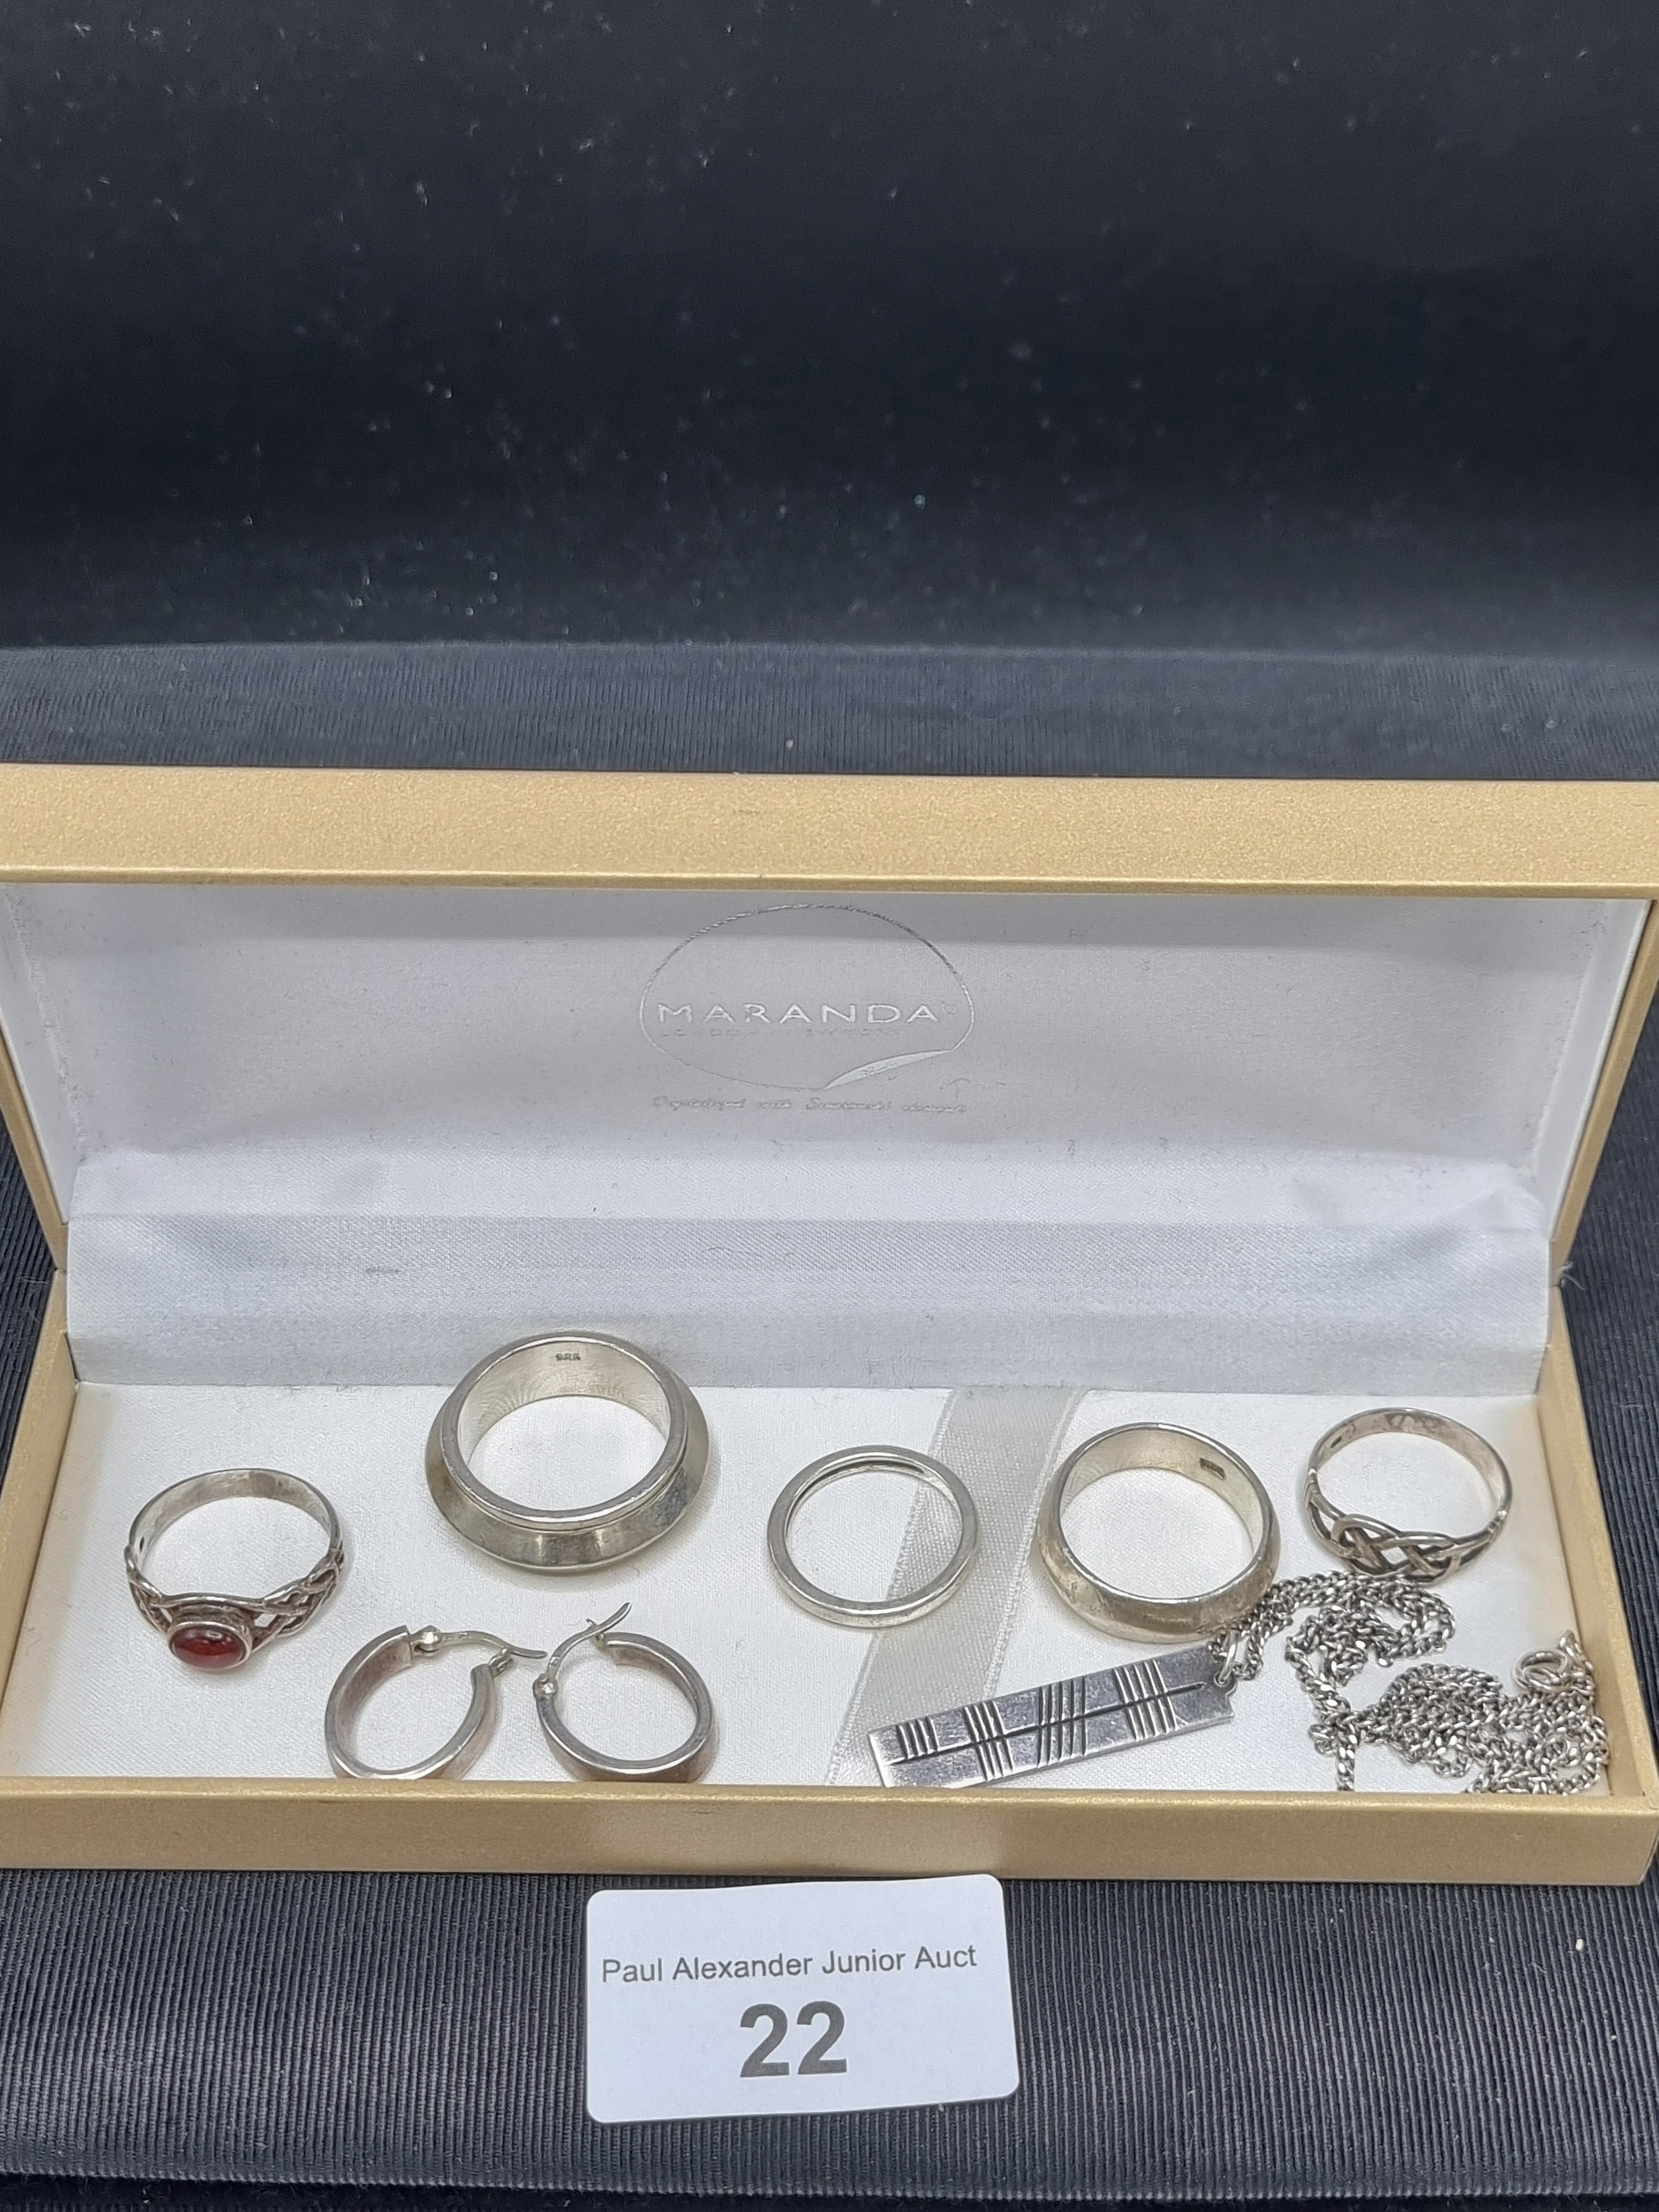 Lot of silver jewellery, men's rings, Celtic rings, earrings and necklace. - Image 2 of 3